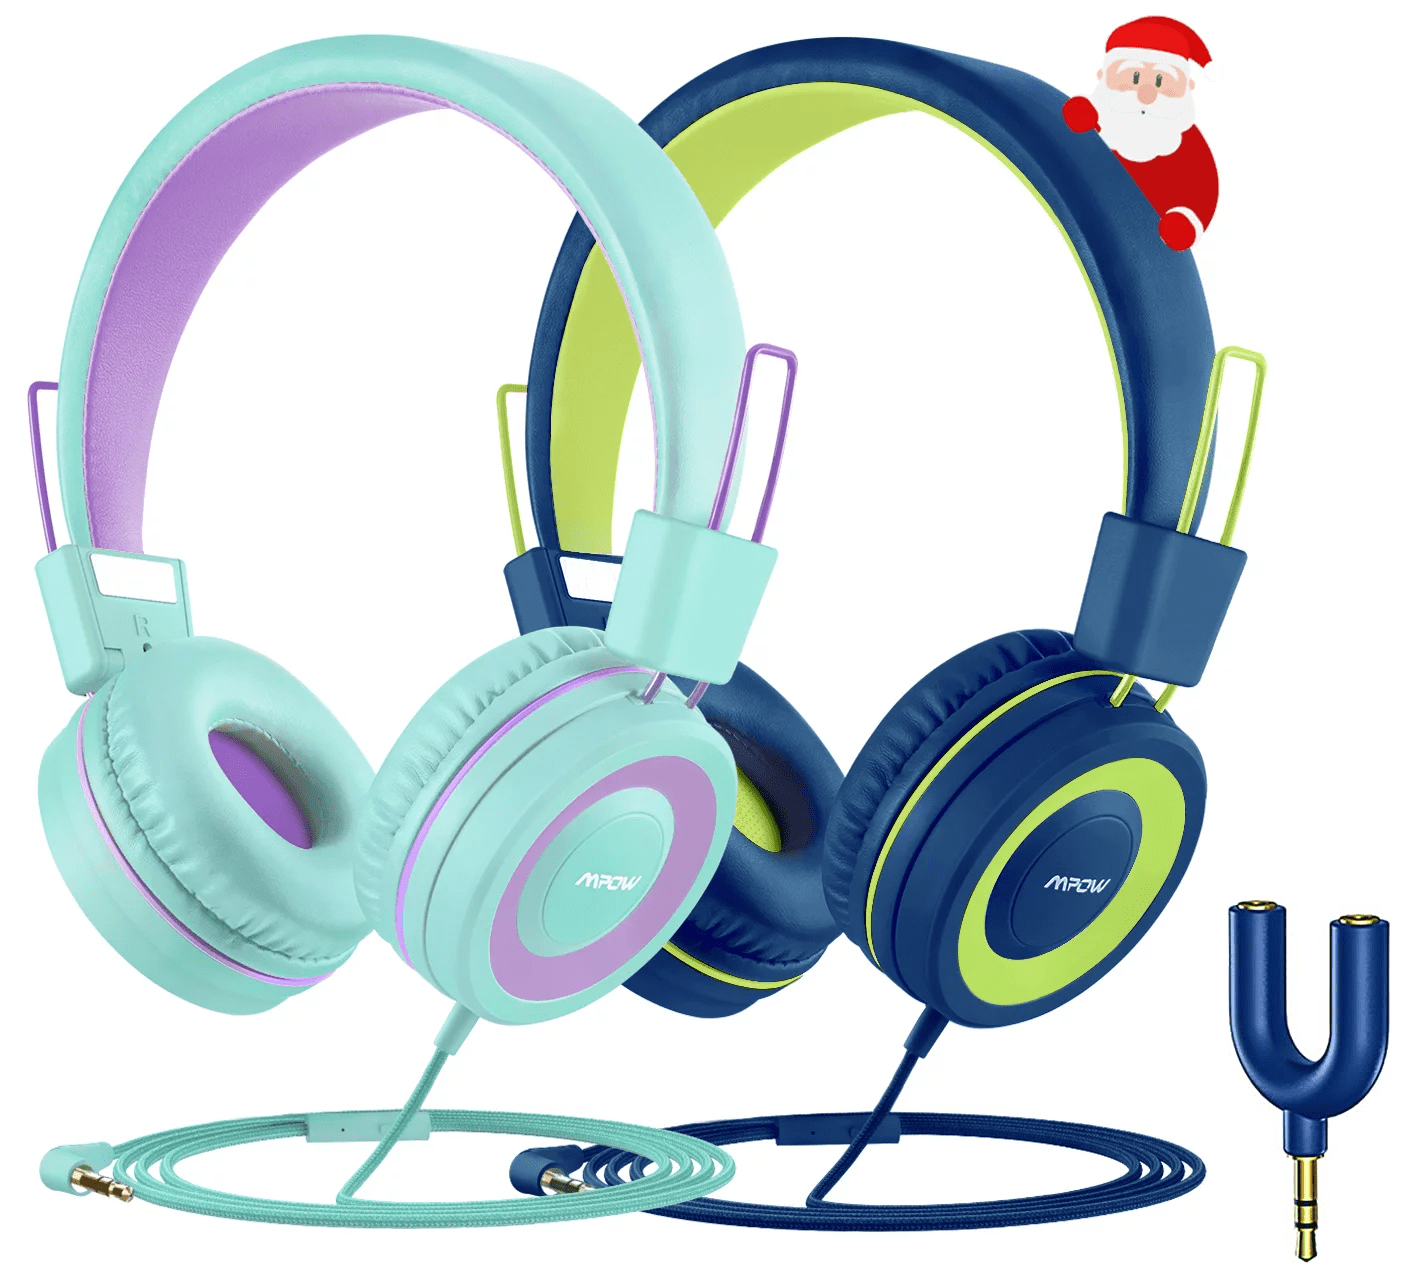 MPOW Kids Headphones with Microphone, Stereo Wired Headphones for Kids 85/94dB  Volume Limit, Adjustable Foldable Children Headphone with Share Port, over  Ear Headsets for School, Tablet, Airplane 